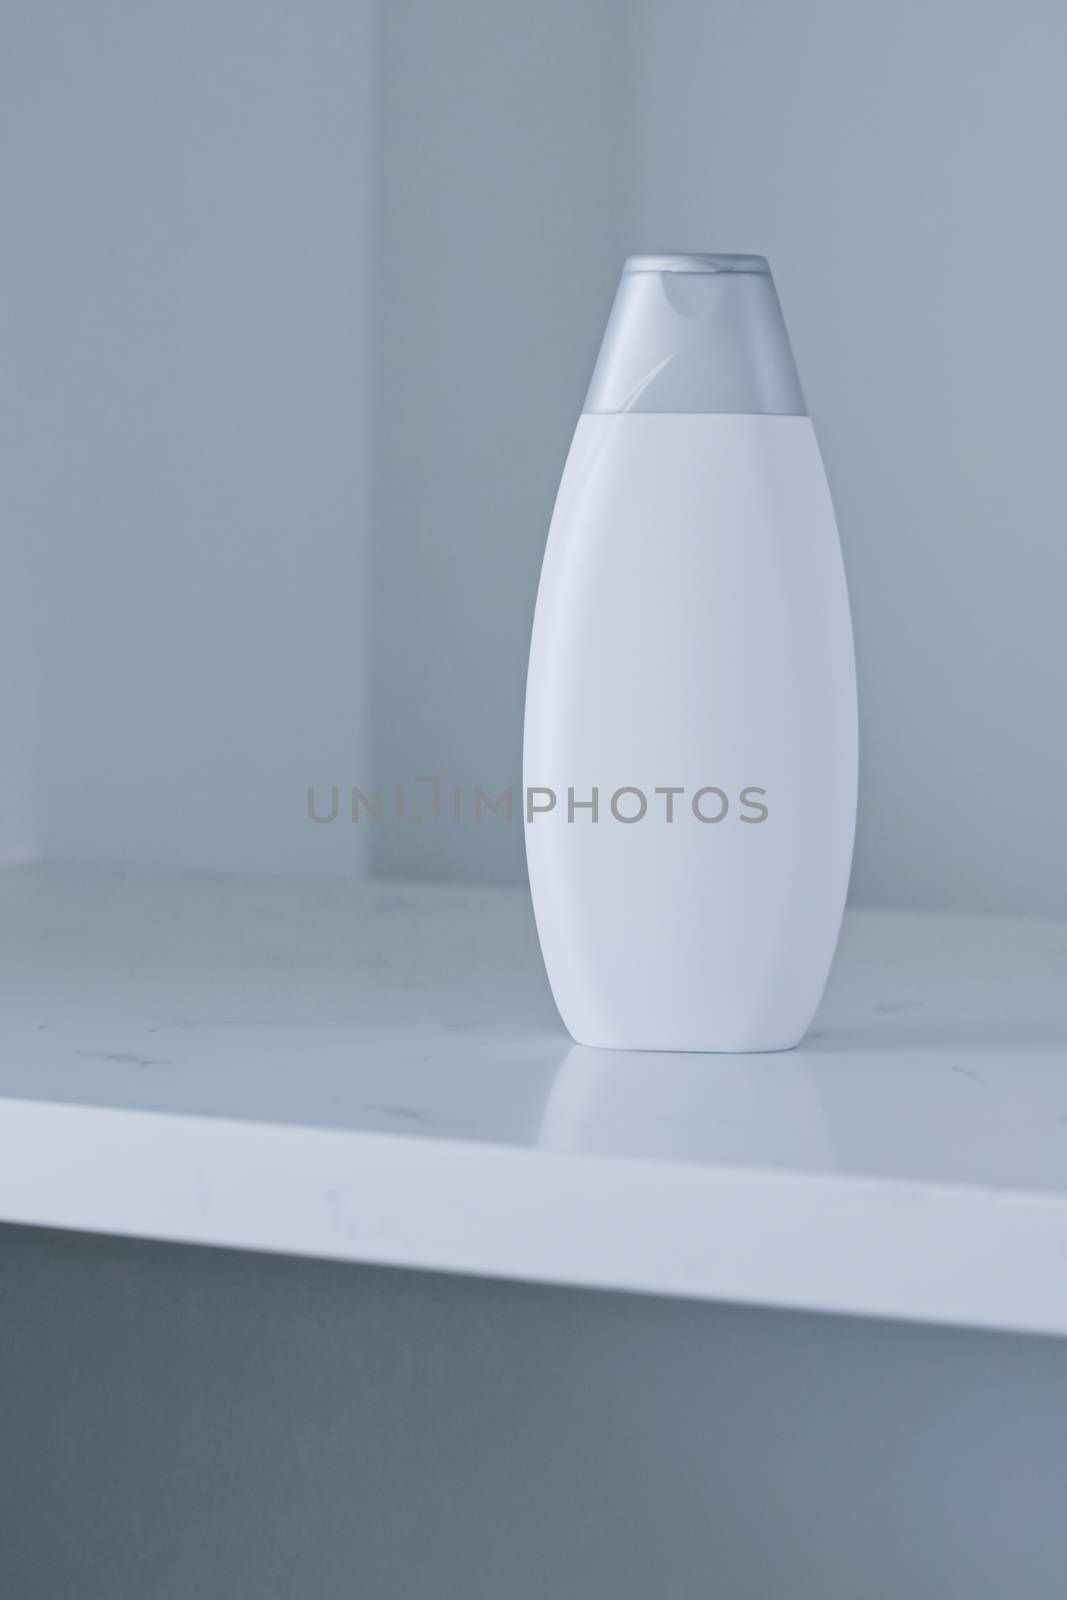 Blank label cosmetic container bottle as product mockup on gray background, hygiene and healthcare